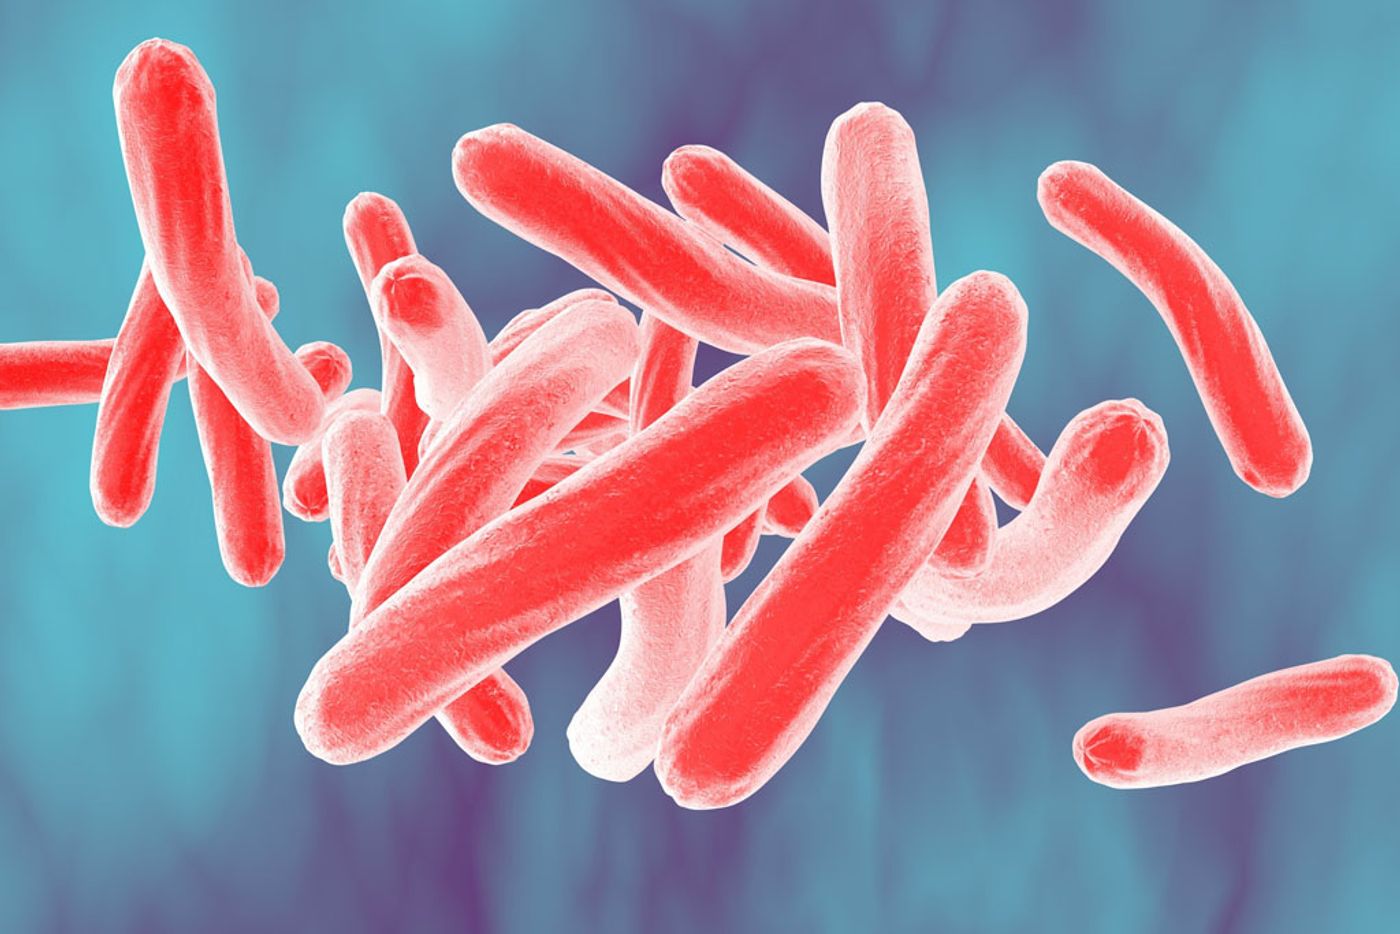 New drugs to treat tuberculosis?